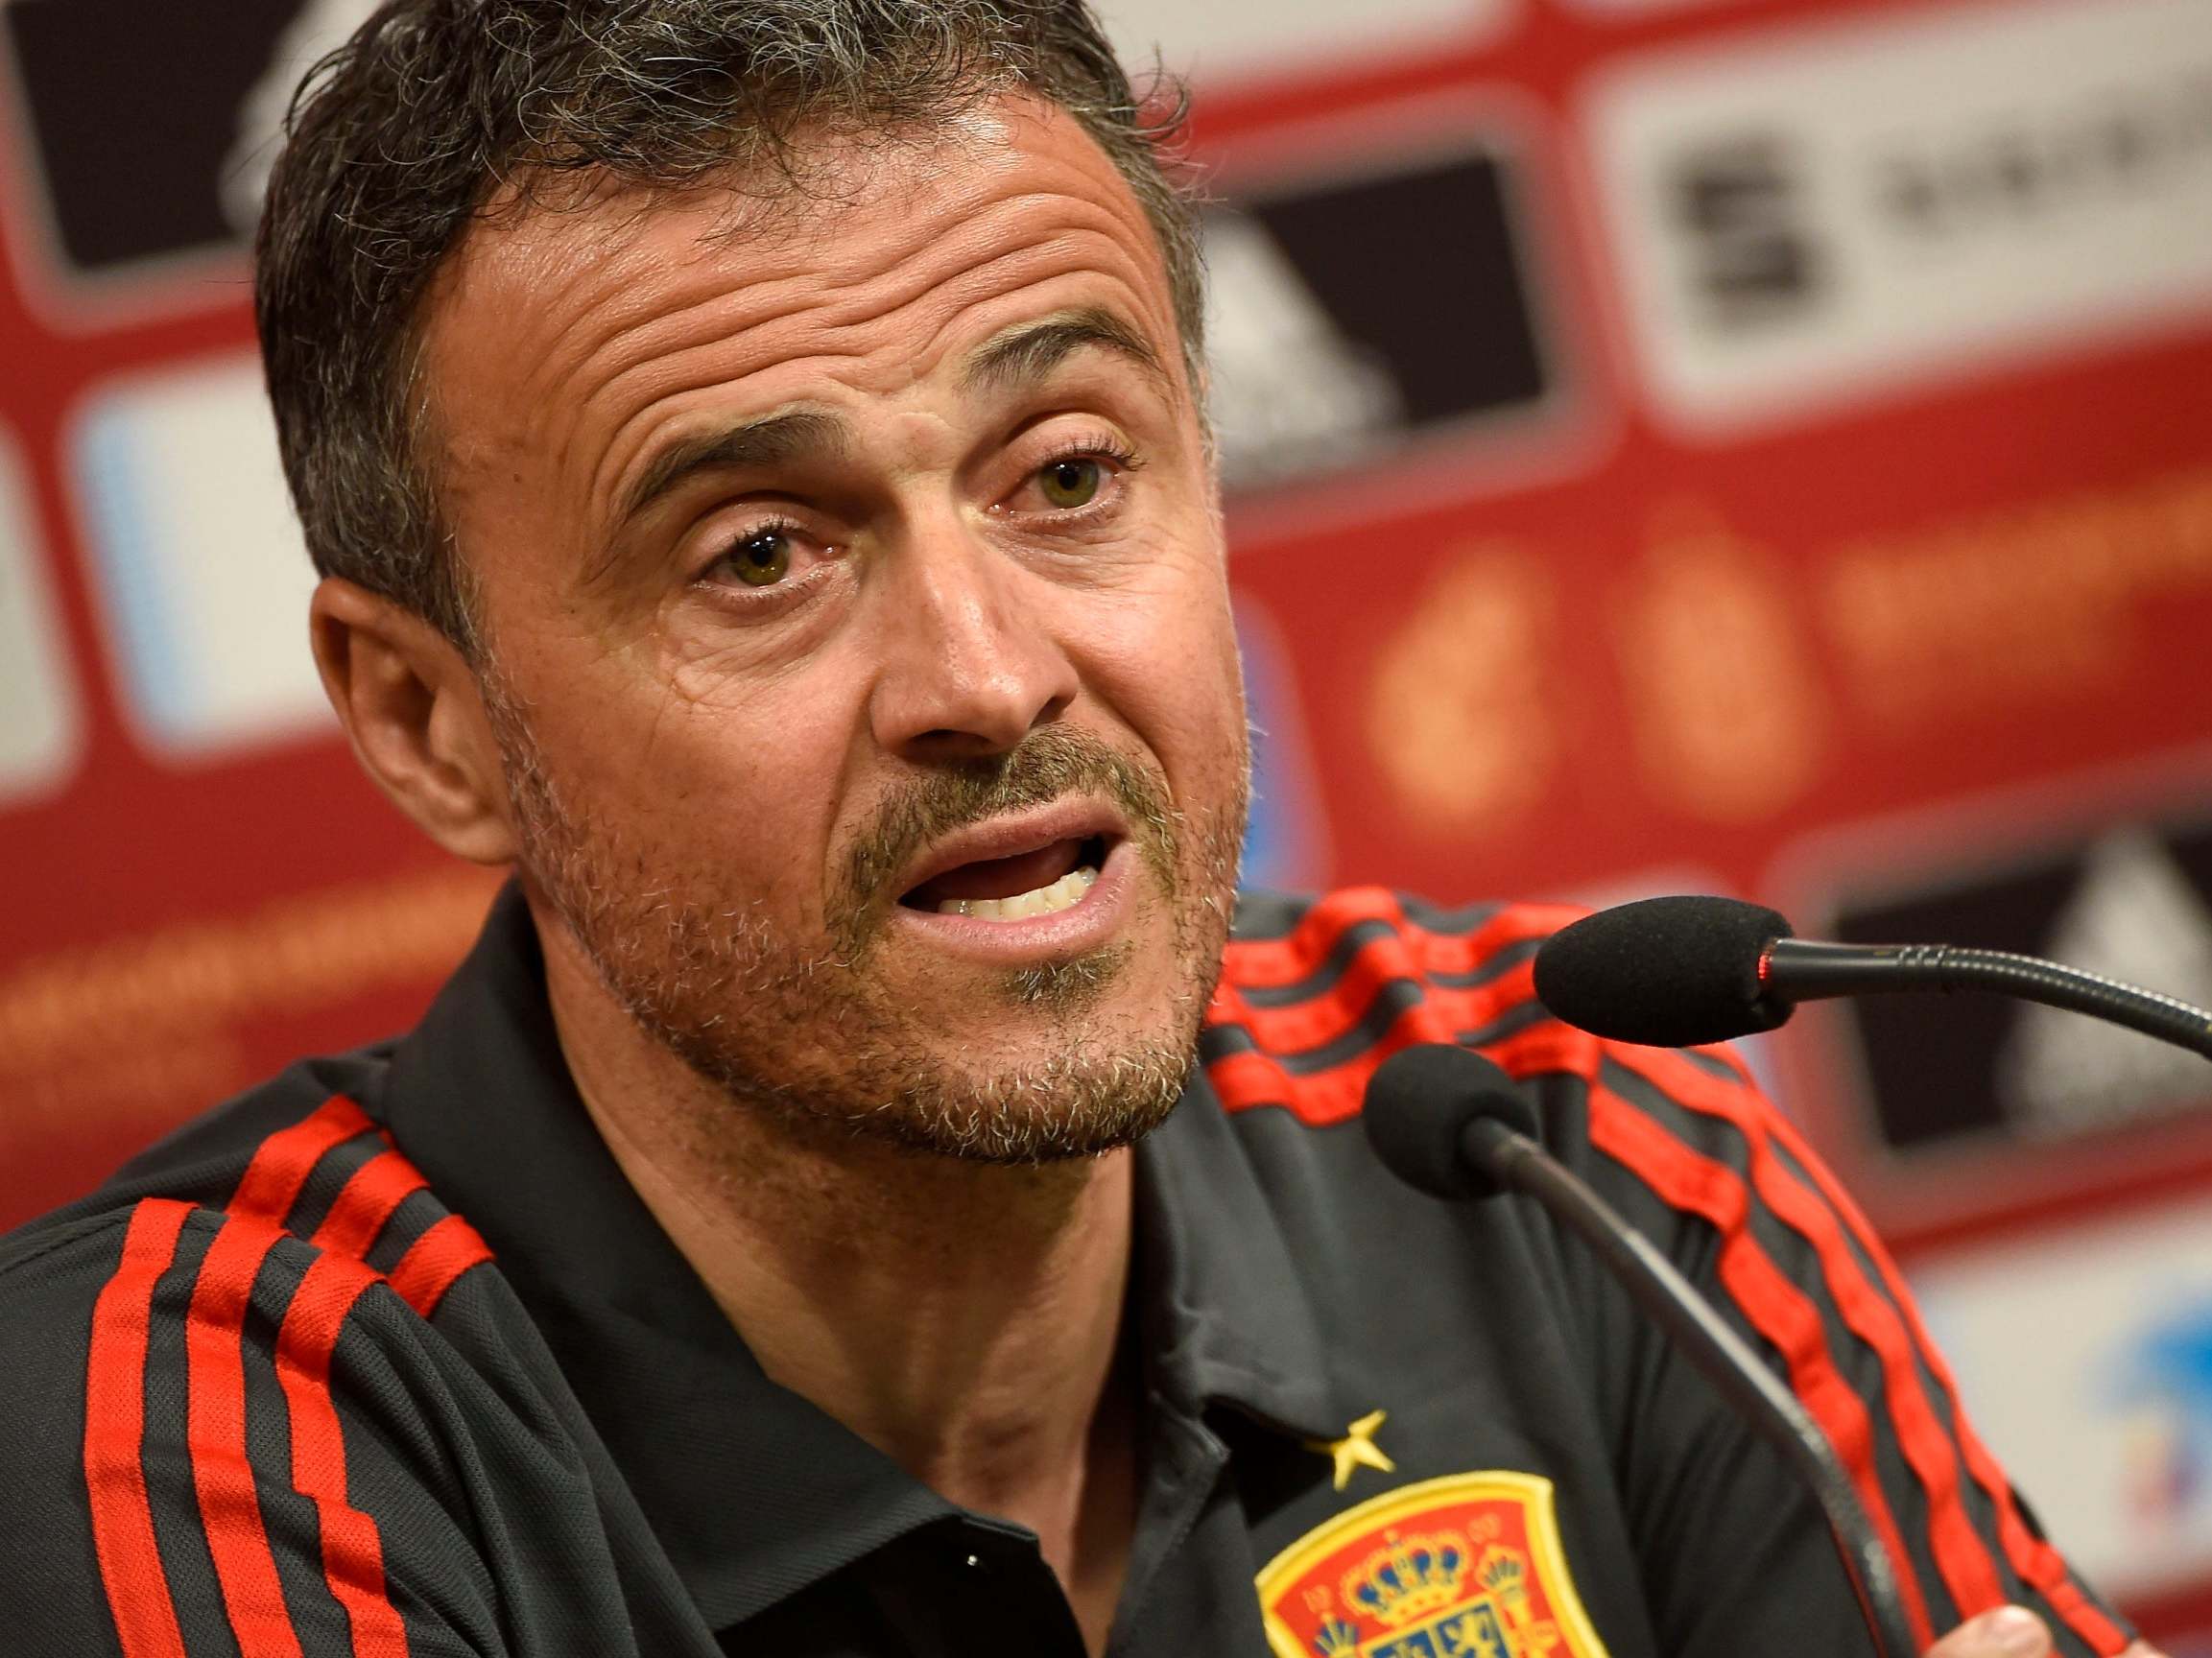 Luis Enrique has returned to his post as national team coach